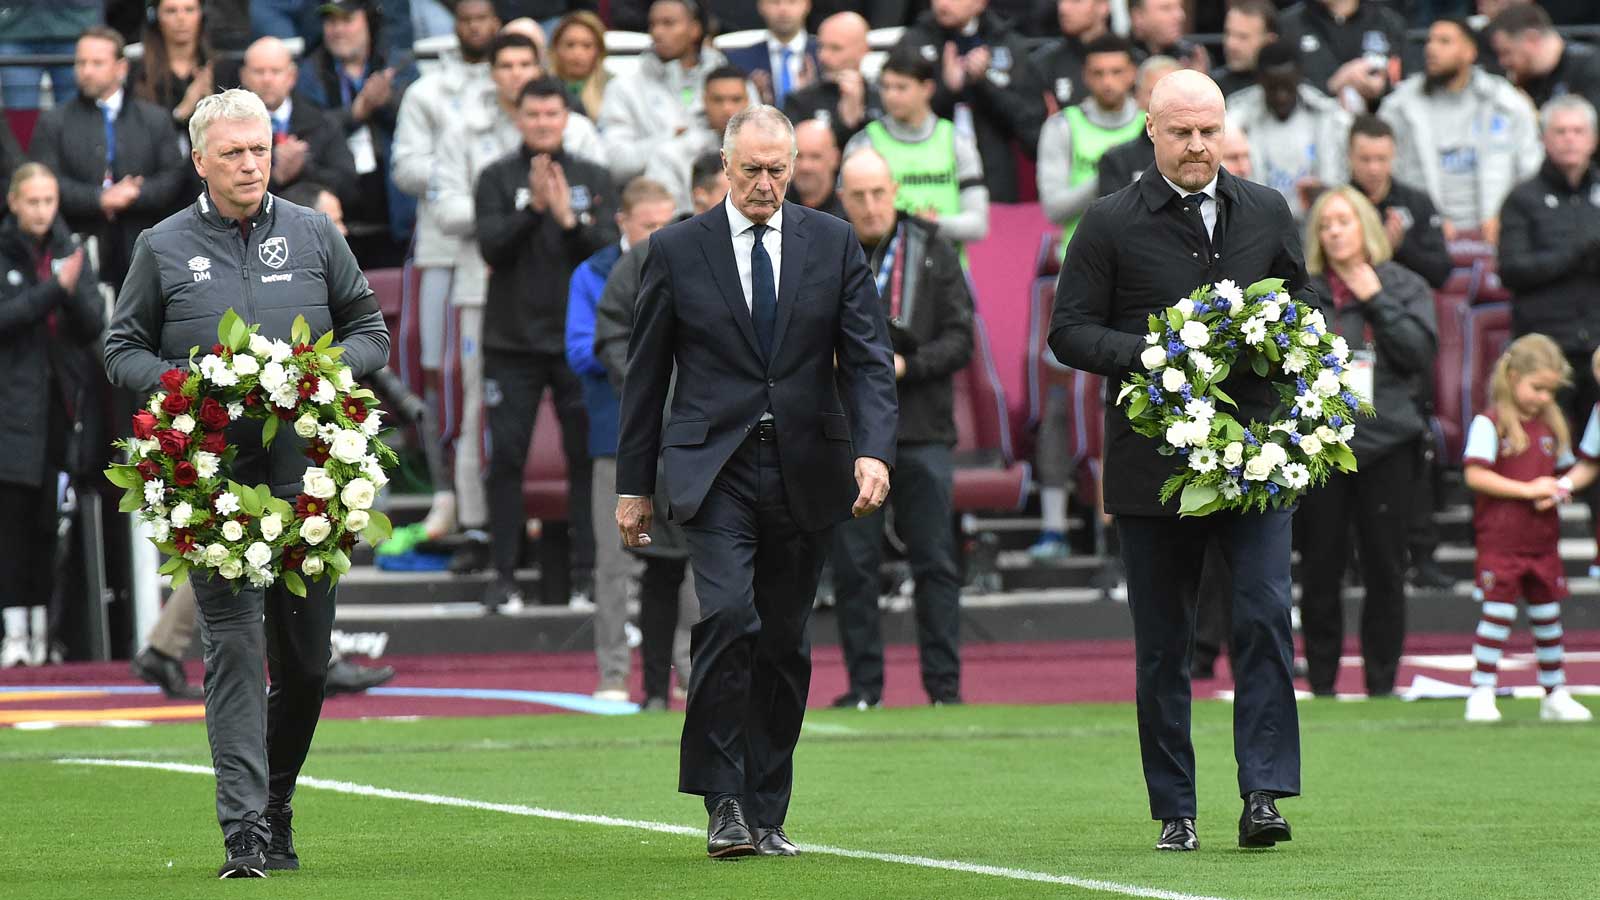 David Moyes, Sir Geoff Hurst and Sean Dyche pay tribute to Sir Bobby Charlton and Bill Kenwright CBE